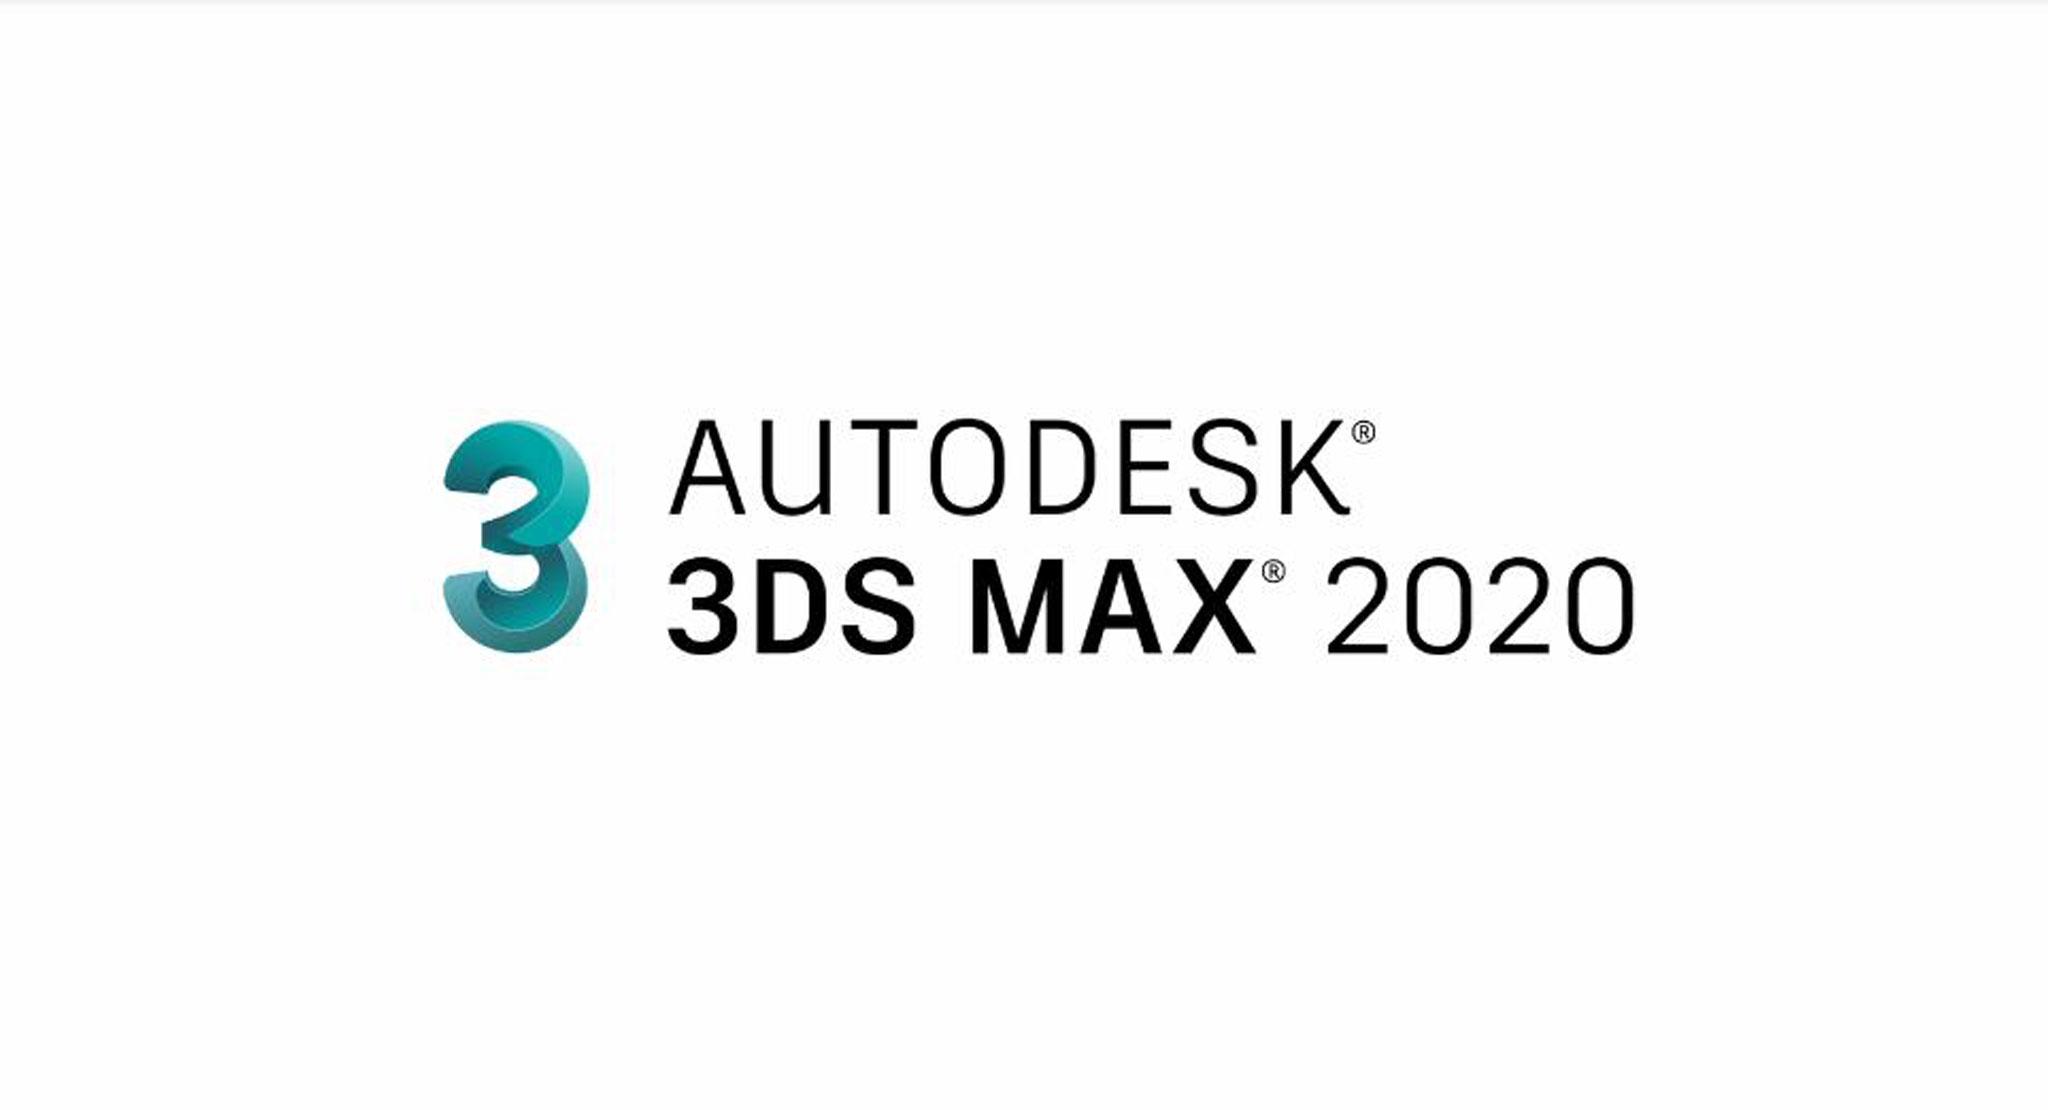 Autodesk 3ds Max Logo - Autodesk 3ds Max 2020 Available Now!